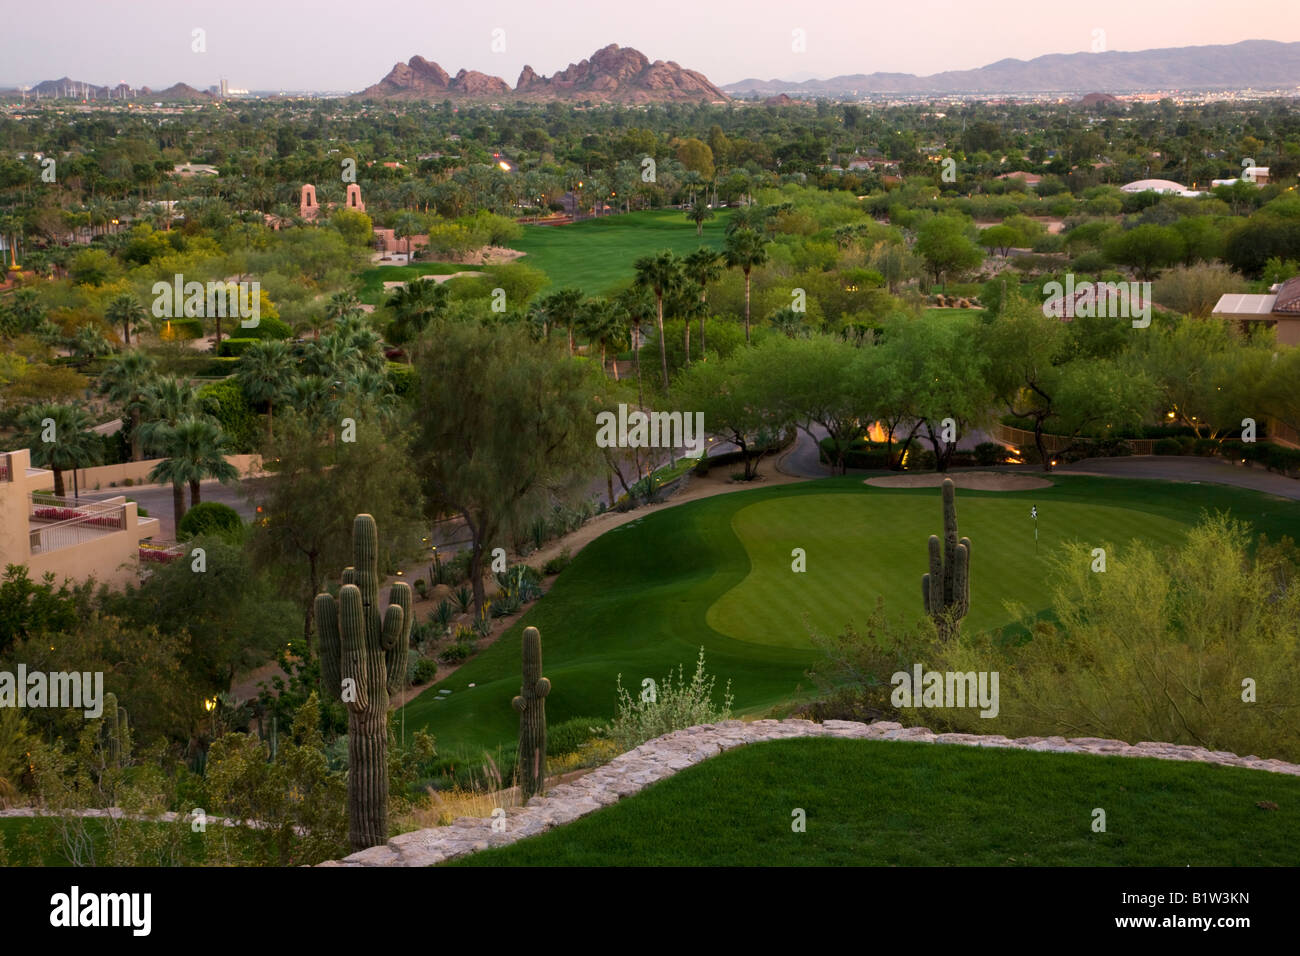 The 8th hole on the Desert Golf Course at the Phoenician Resort in Scottsdale Arizona Stock Photo